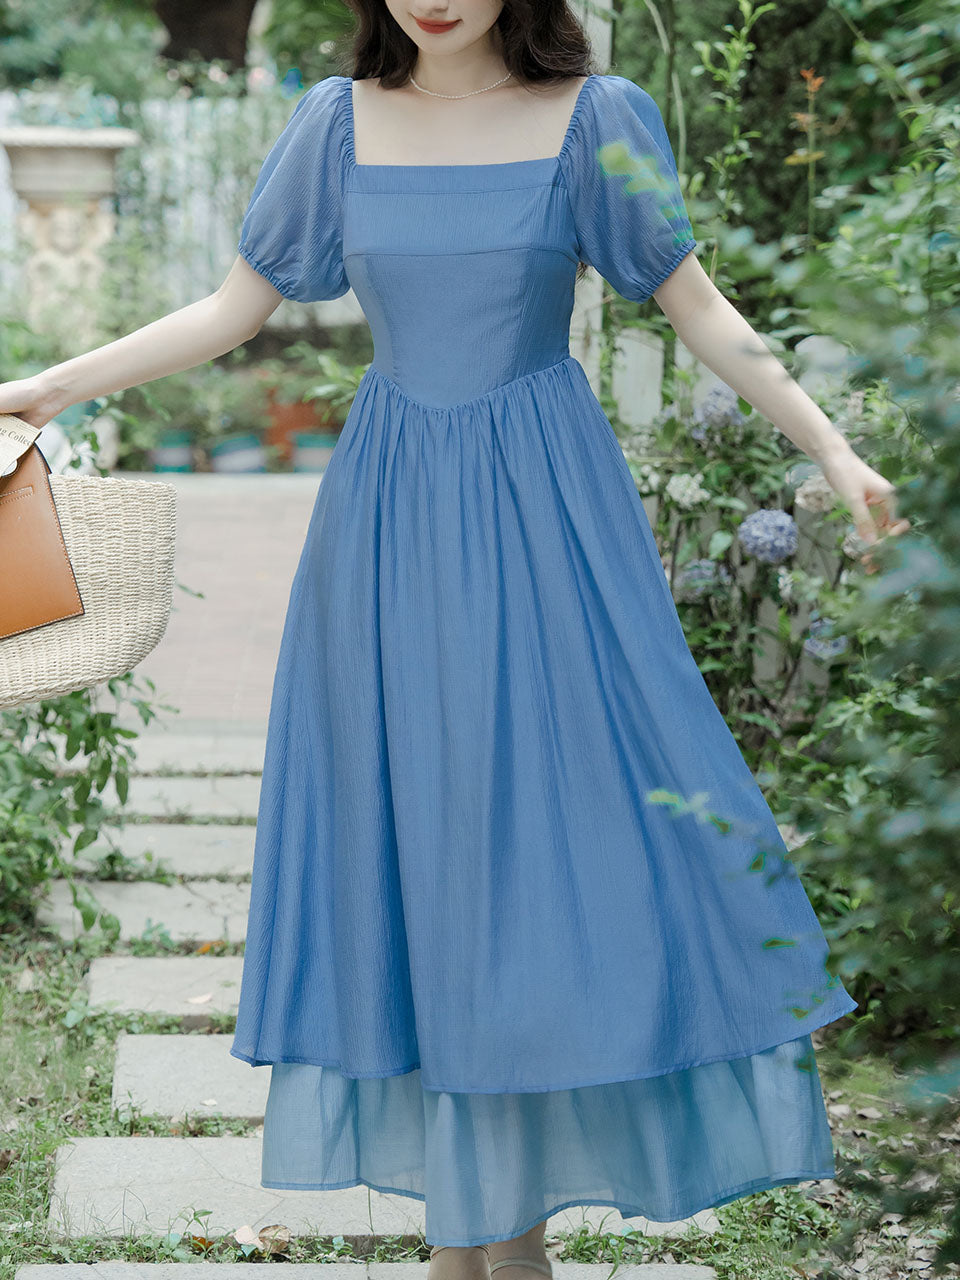 1950S Vintage Blue Square Collar Swing Dress Inspired The Little Mermaid